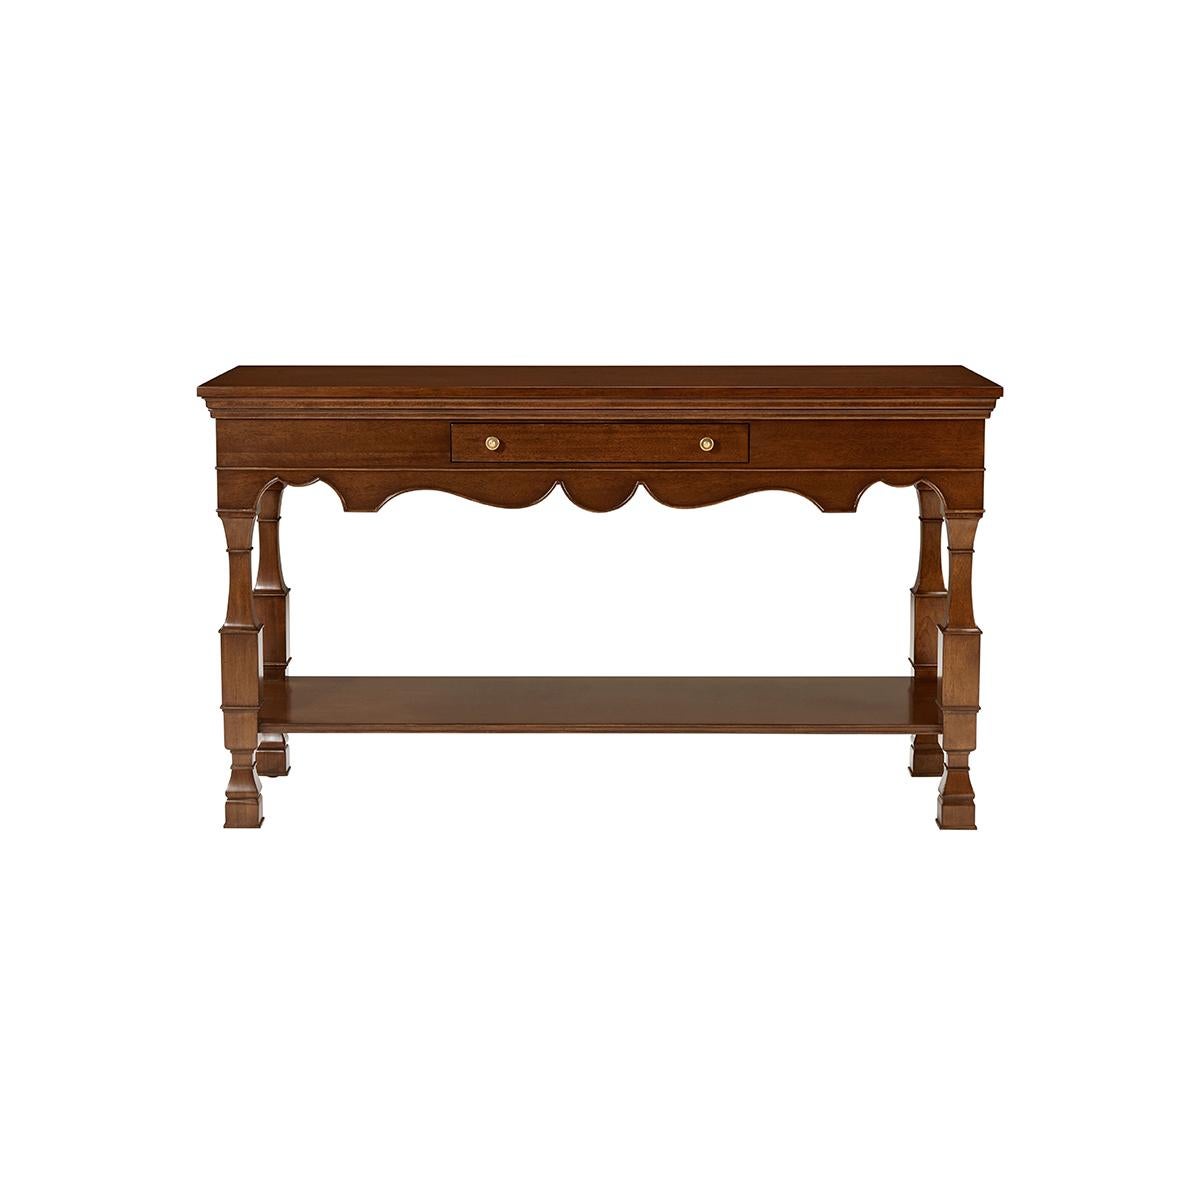 In a warm medium polished finish, the console has a rectangular top above a frieze with three drawers and a scalloped apron. Raised on carved column legs and a shelf stretcher base.

Dimensions: 58